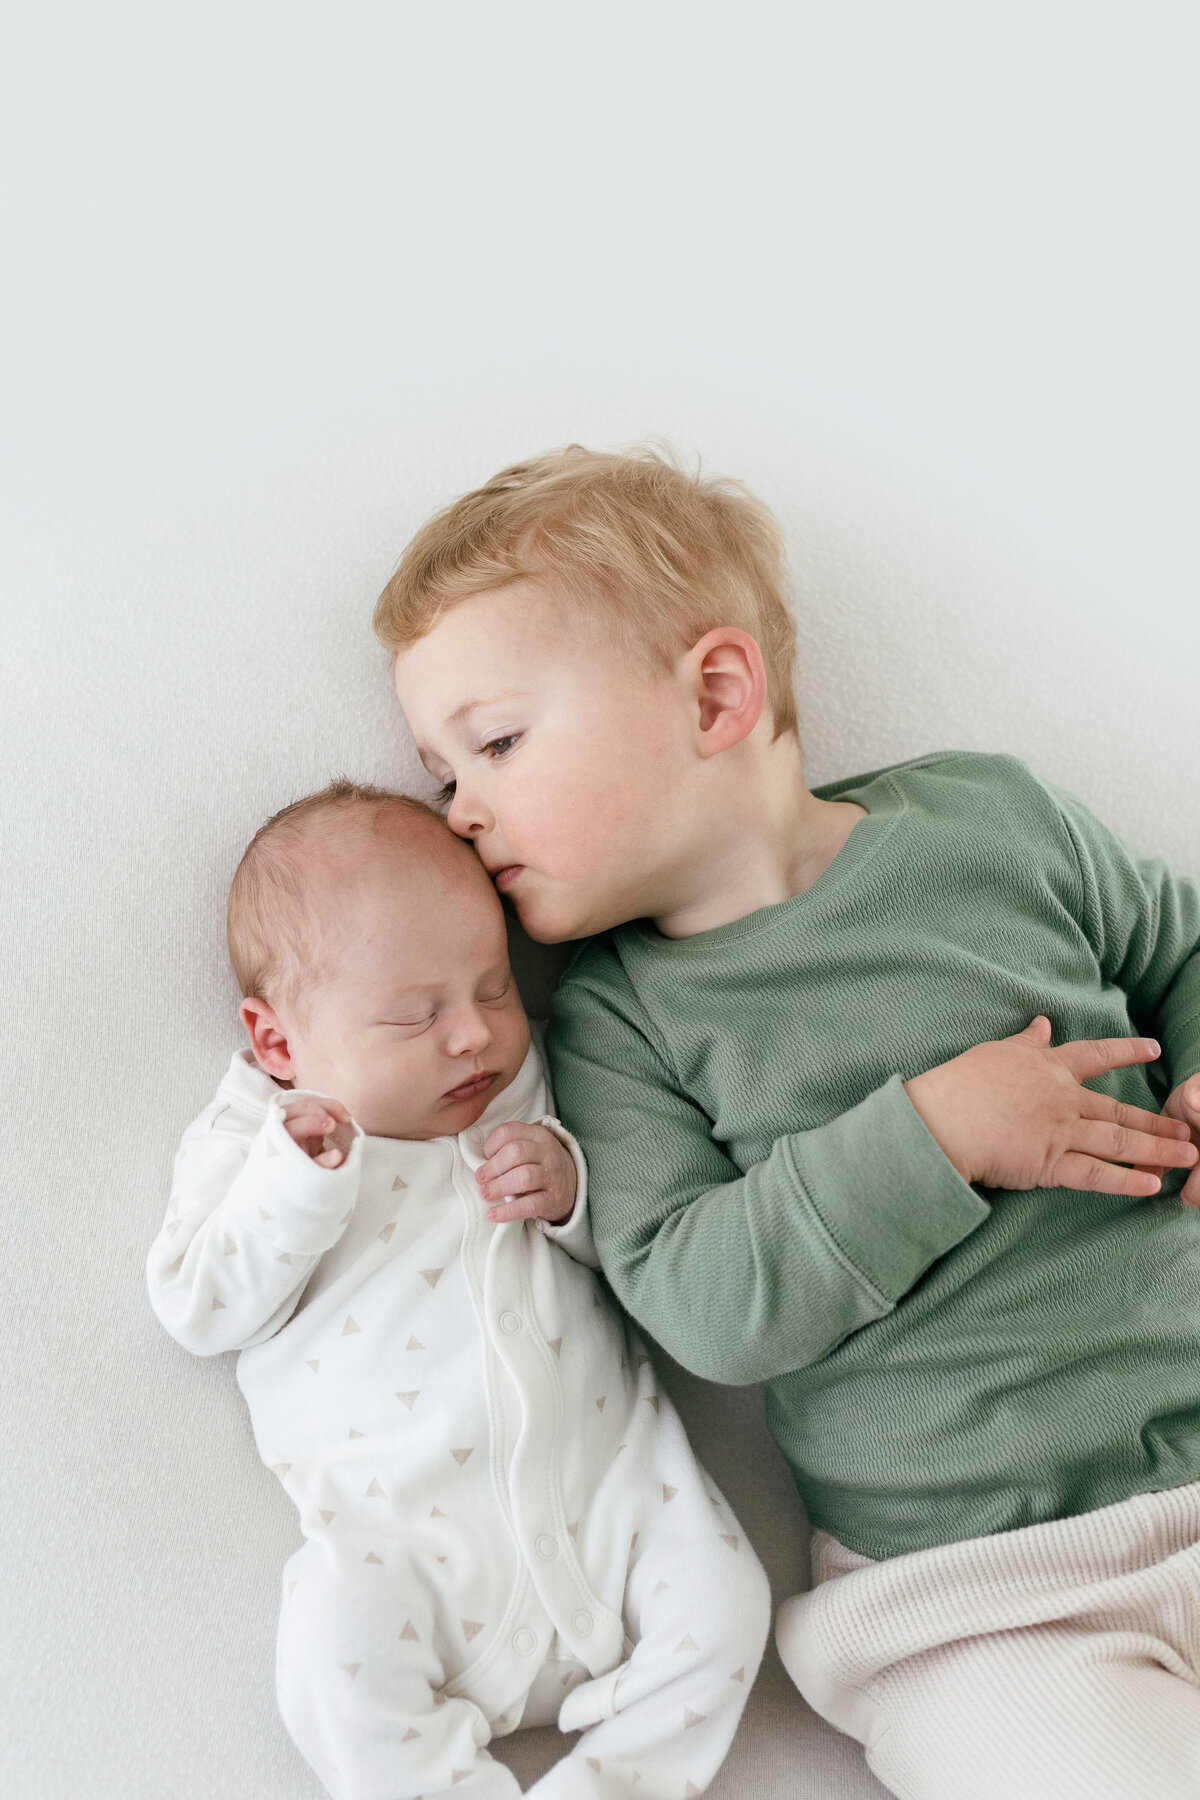 Older brother and baby sibling photography